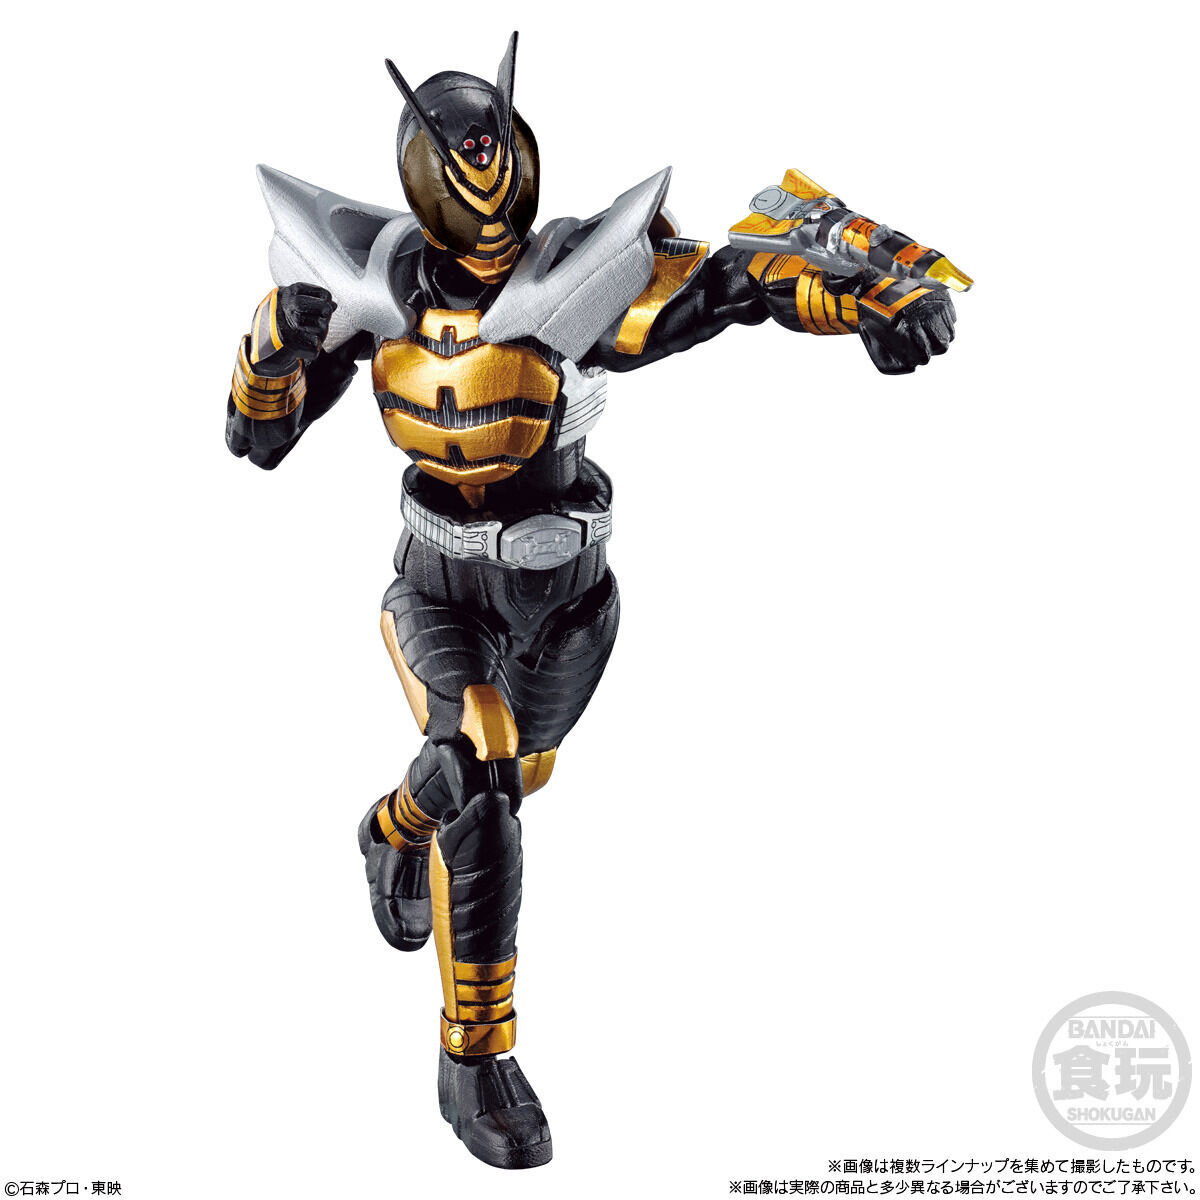 SO-DO CHRONICLE 仮面ライダーカブト(10個入) | 仮面ライダーカブト 